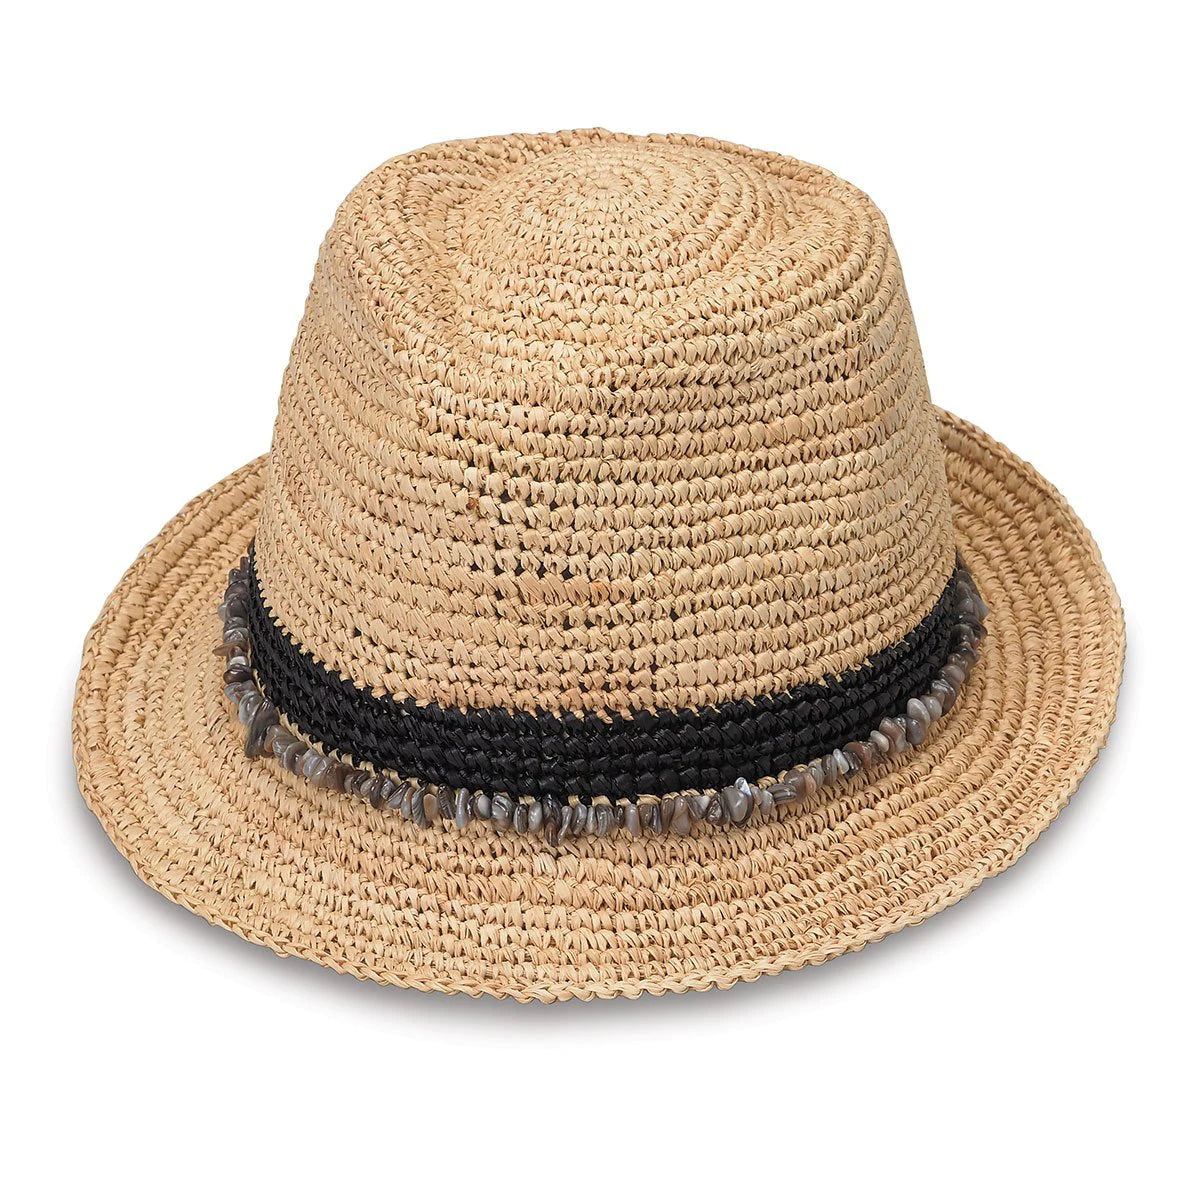 A marriage of tropical materials with urban style, the Tahiti short brim sun hat can be worn anywhere your travels take you.